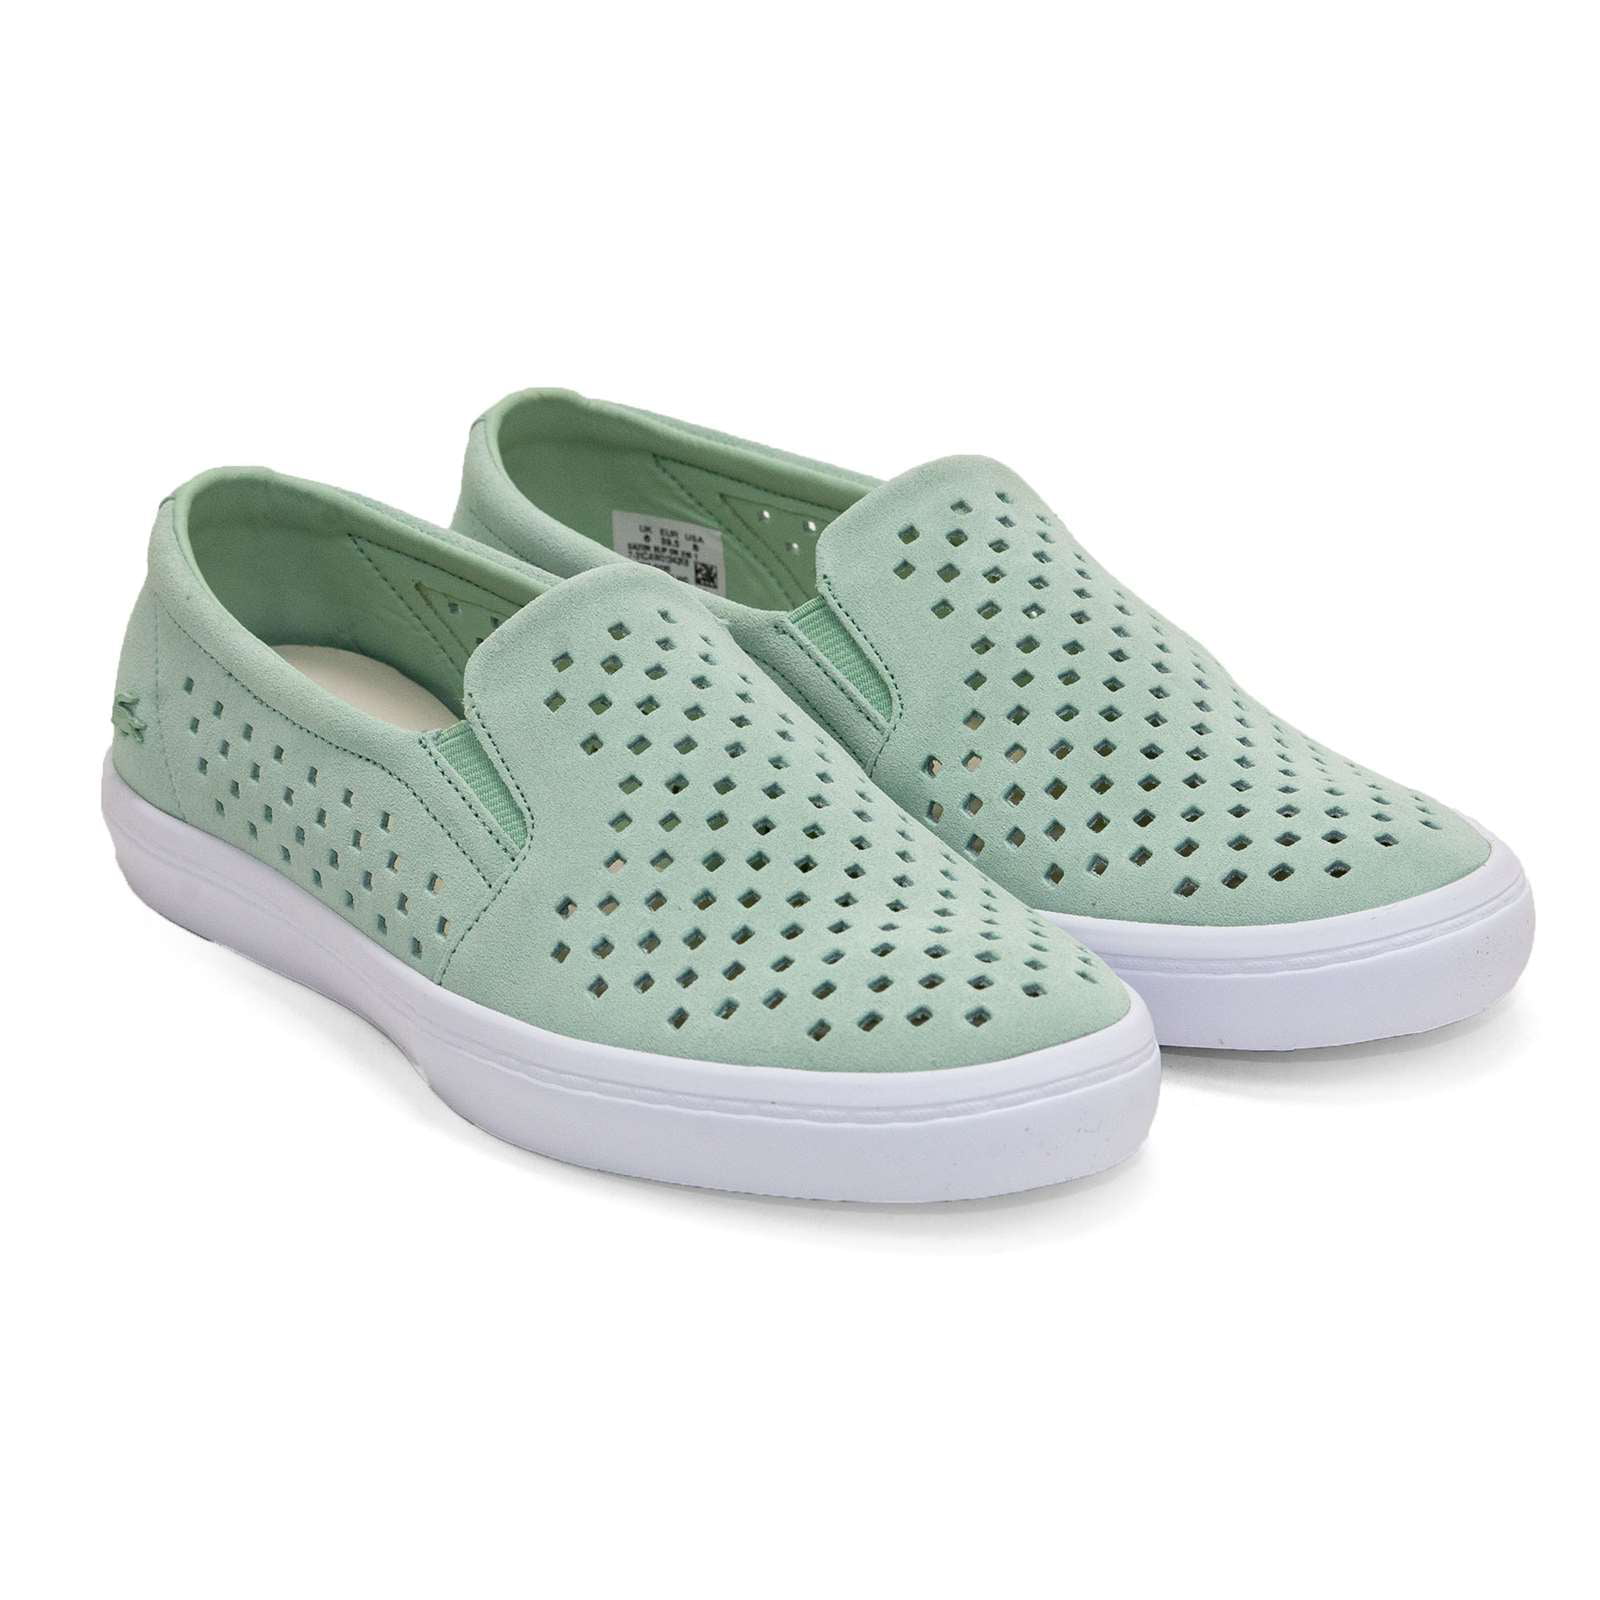 Lacoste Womens Shoes Gazon Slip On Shoes Perforated Leather Casual Sneaker NEW 